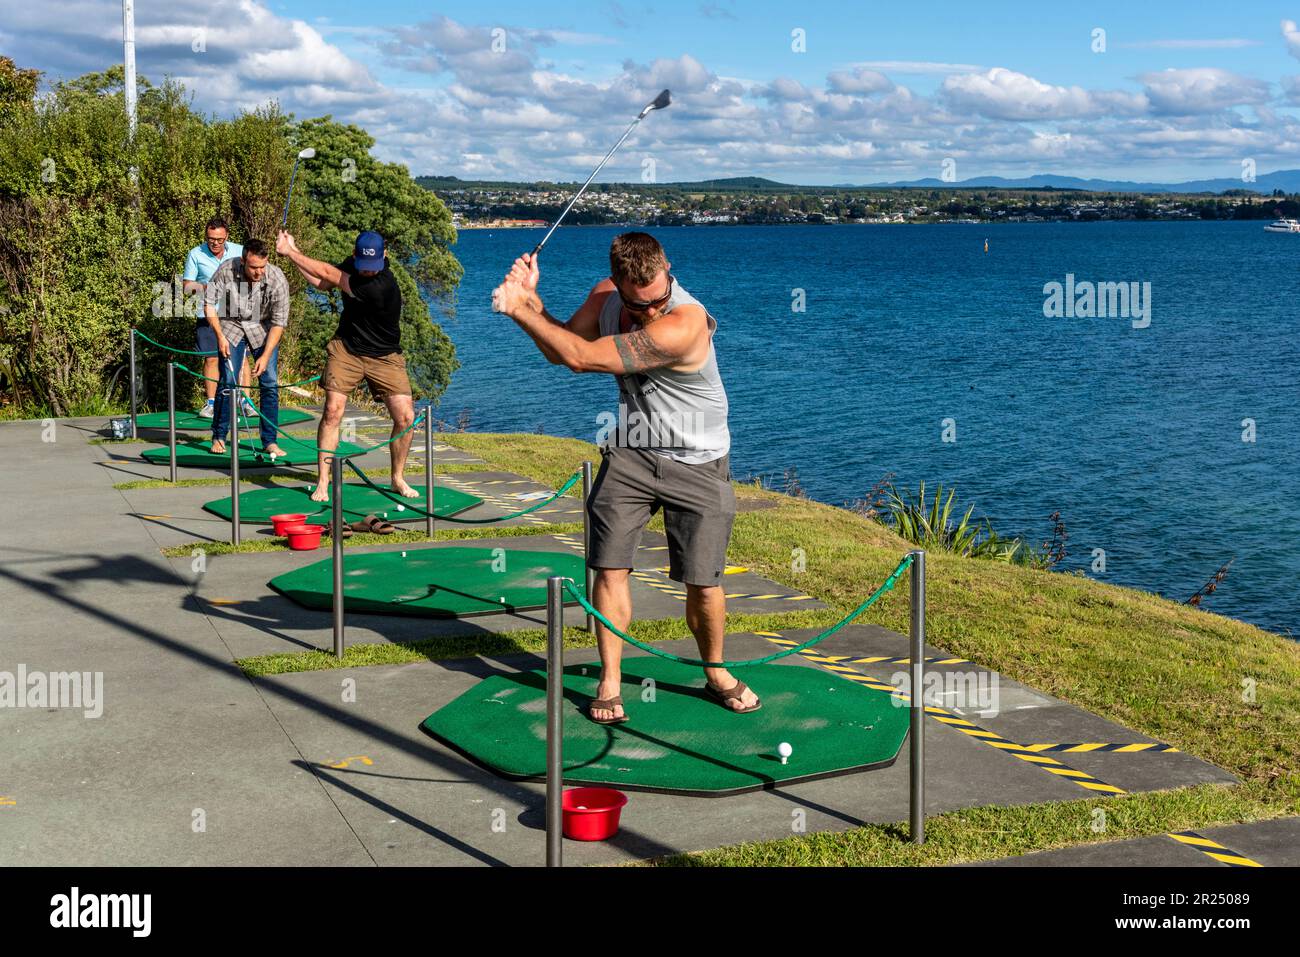 Visitors To Lake Taupo Play The Hole In One Challenge, Lake Taupo, New Zealand Stock Photo